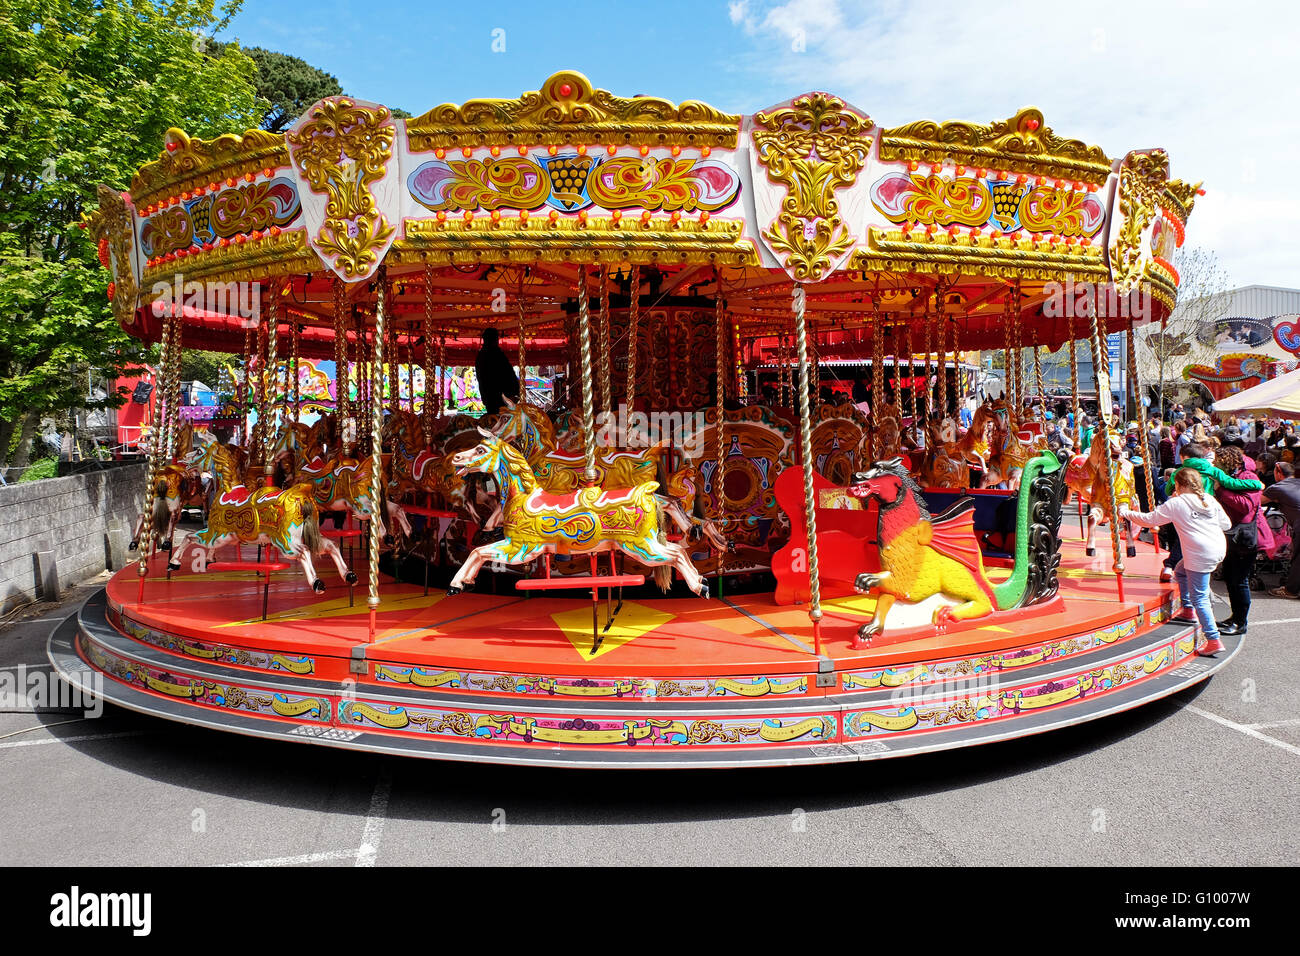 A Merry go round at a funfair in the UK. Stock Photo